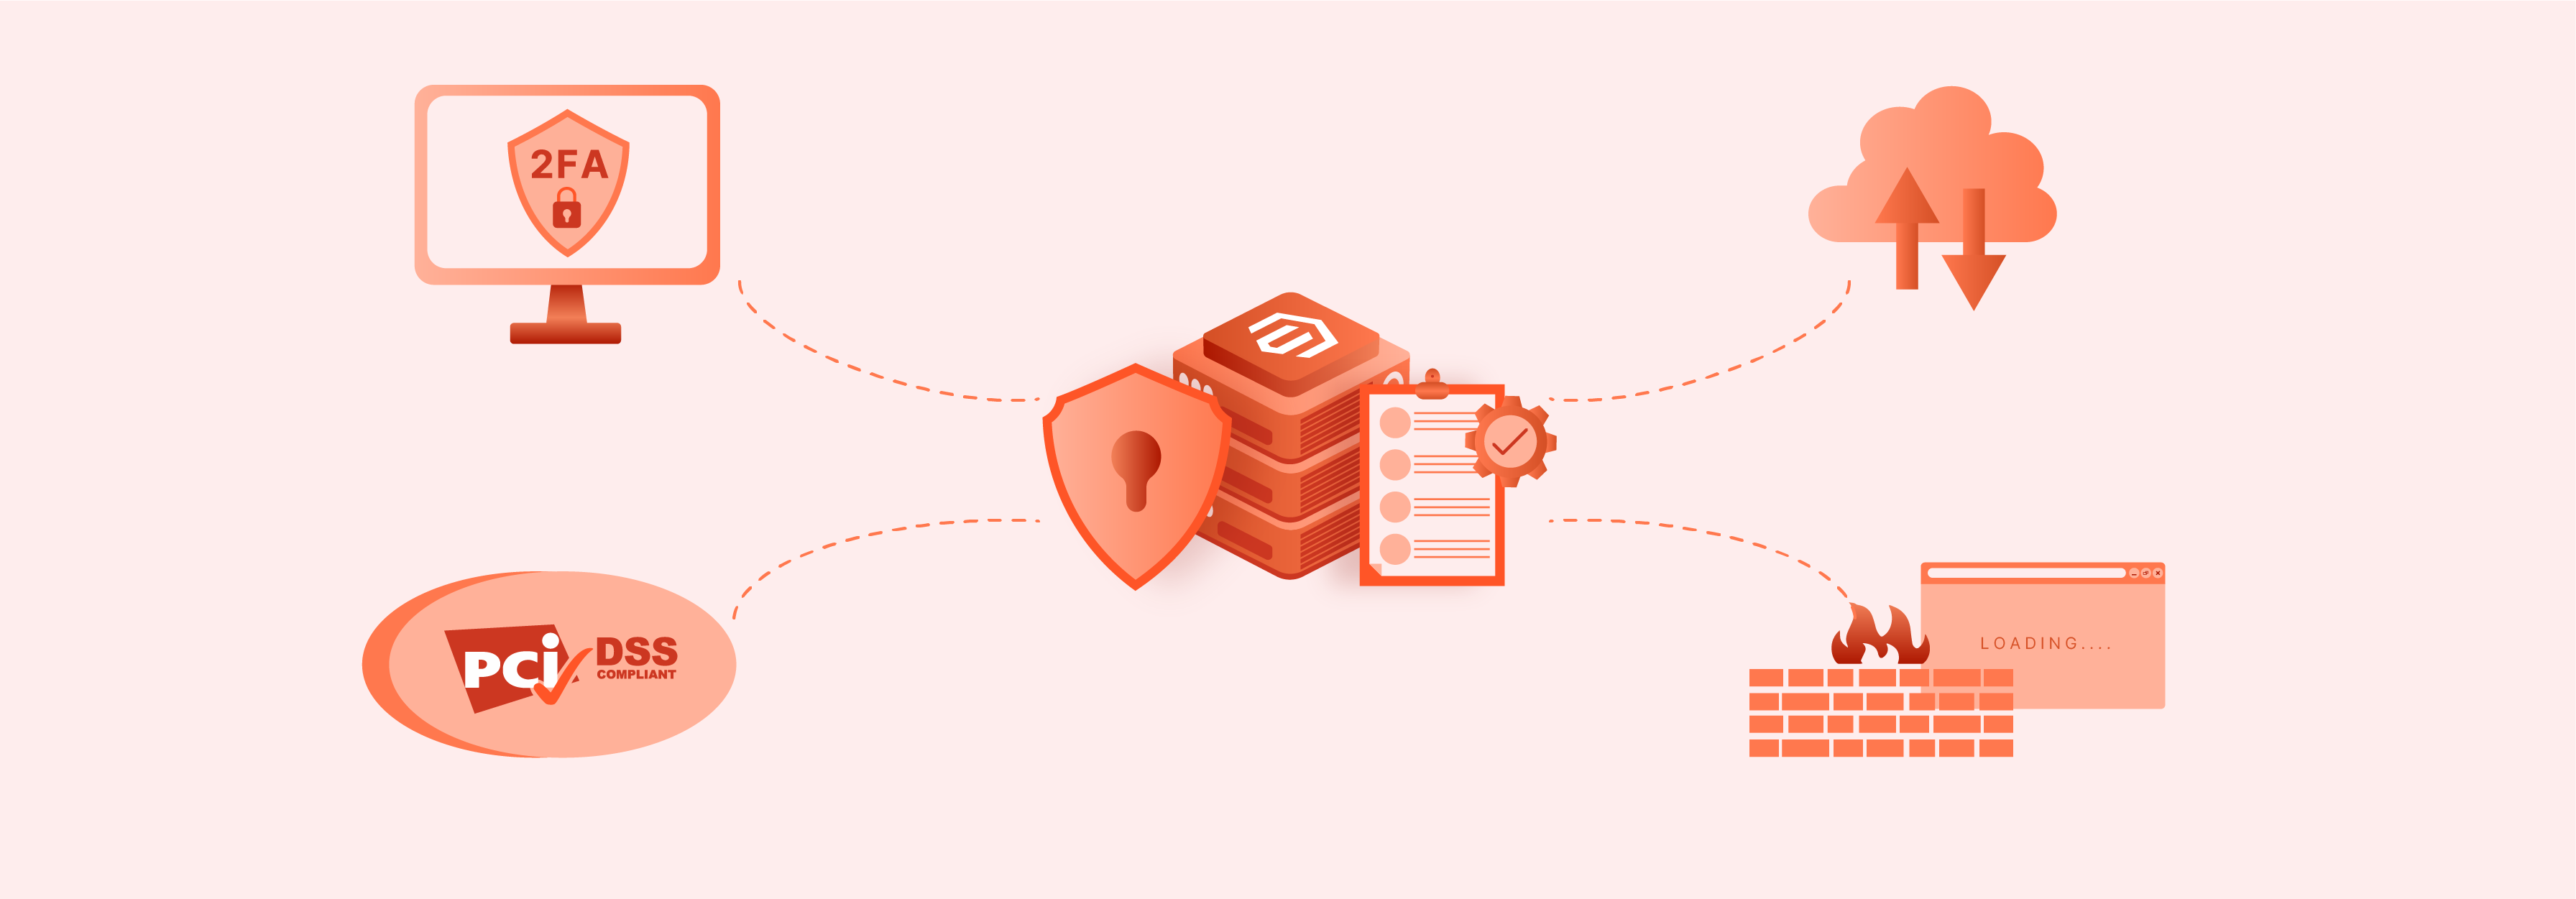 Enhanced security and compliance features in Magento hosting